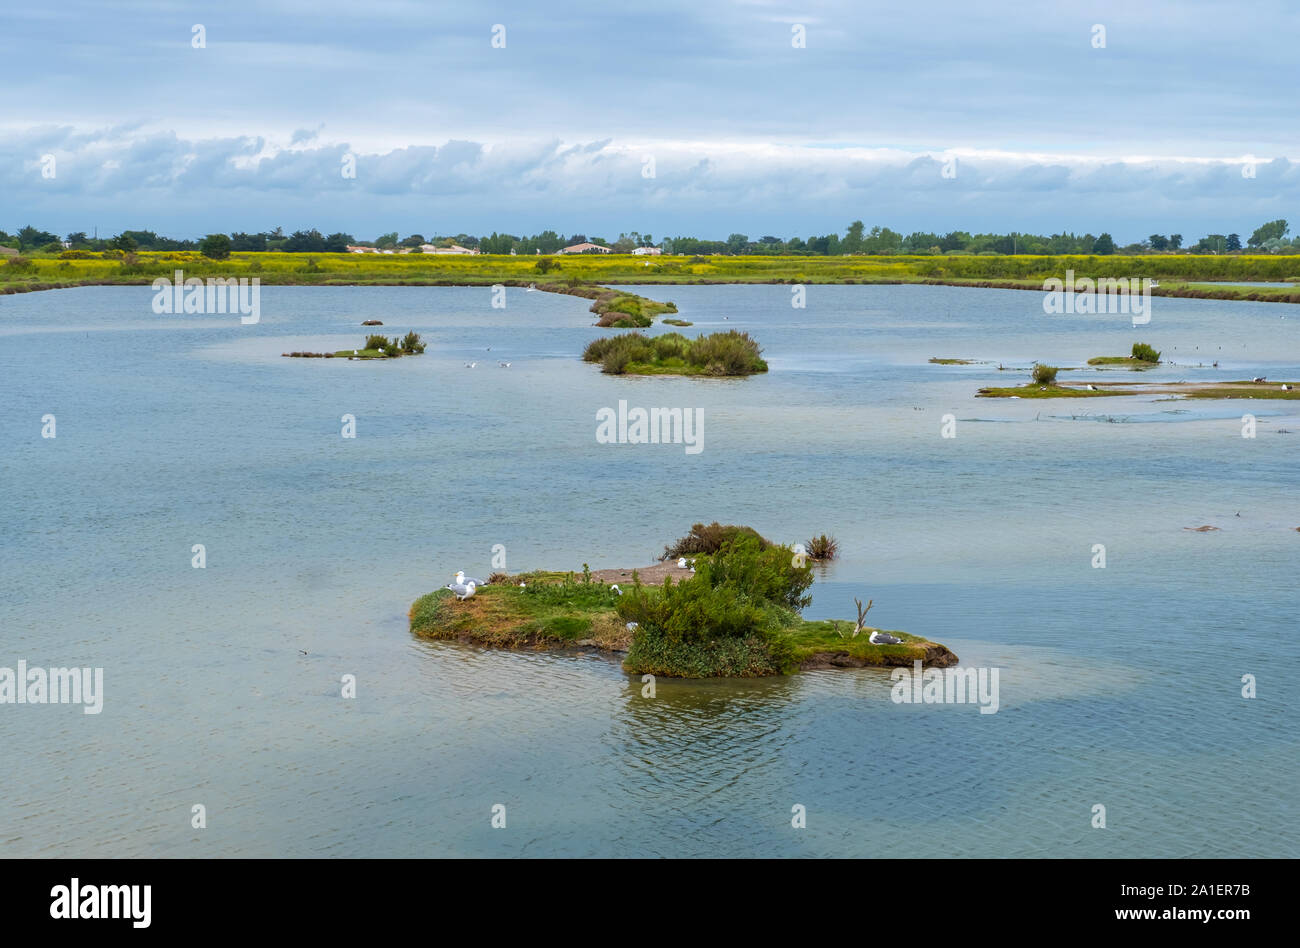 Beautiful view of Lilleau des Niges National Nature Reserve of Ile de Re island in France Stock Photo